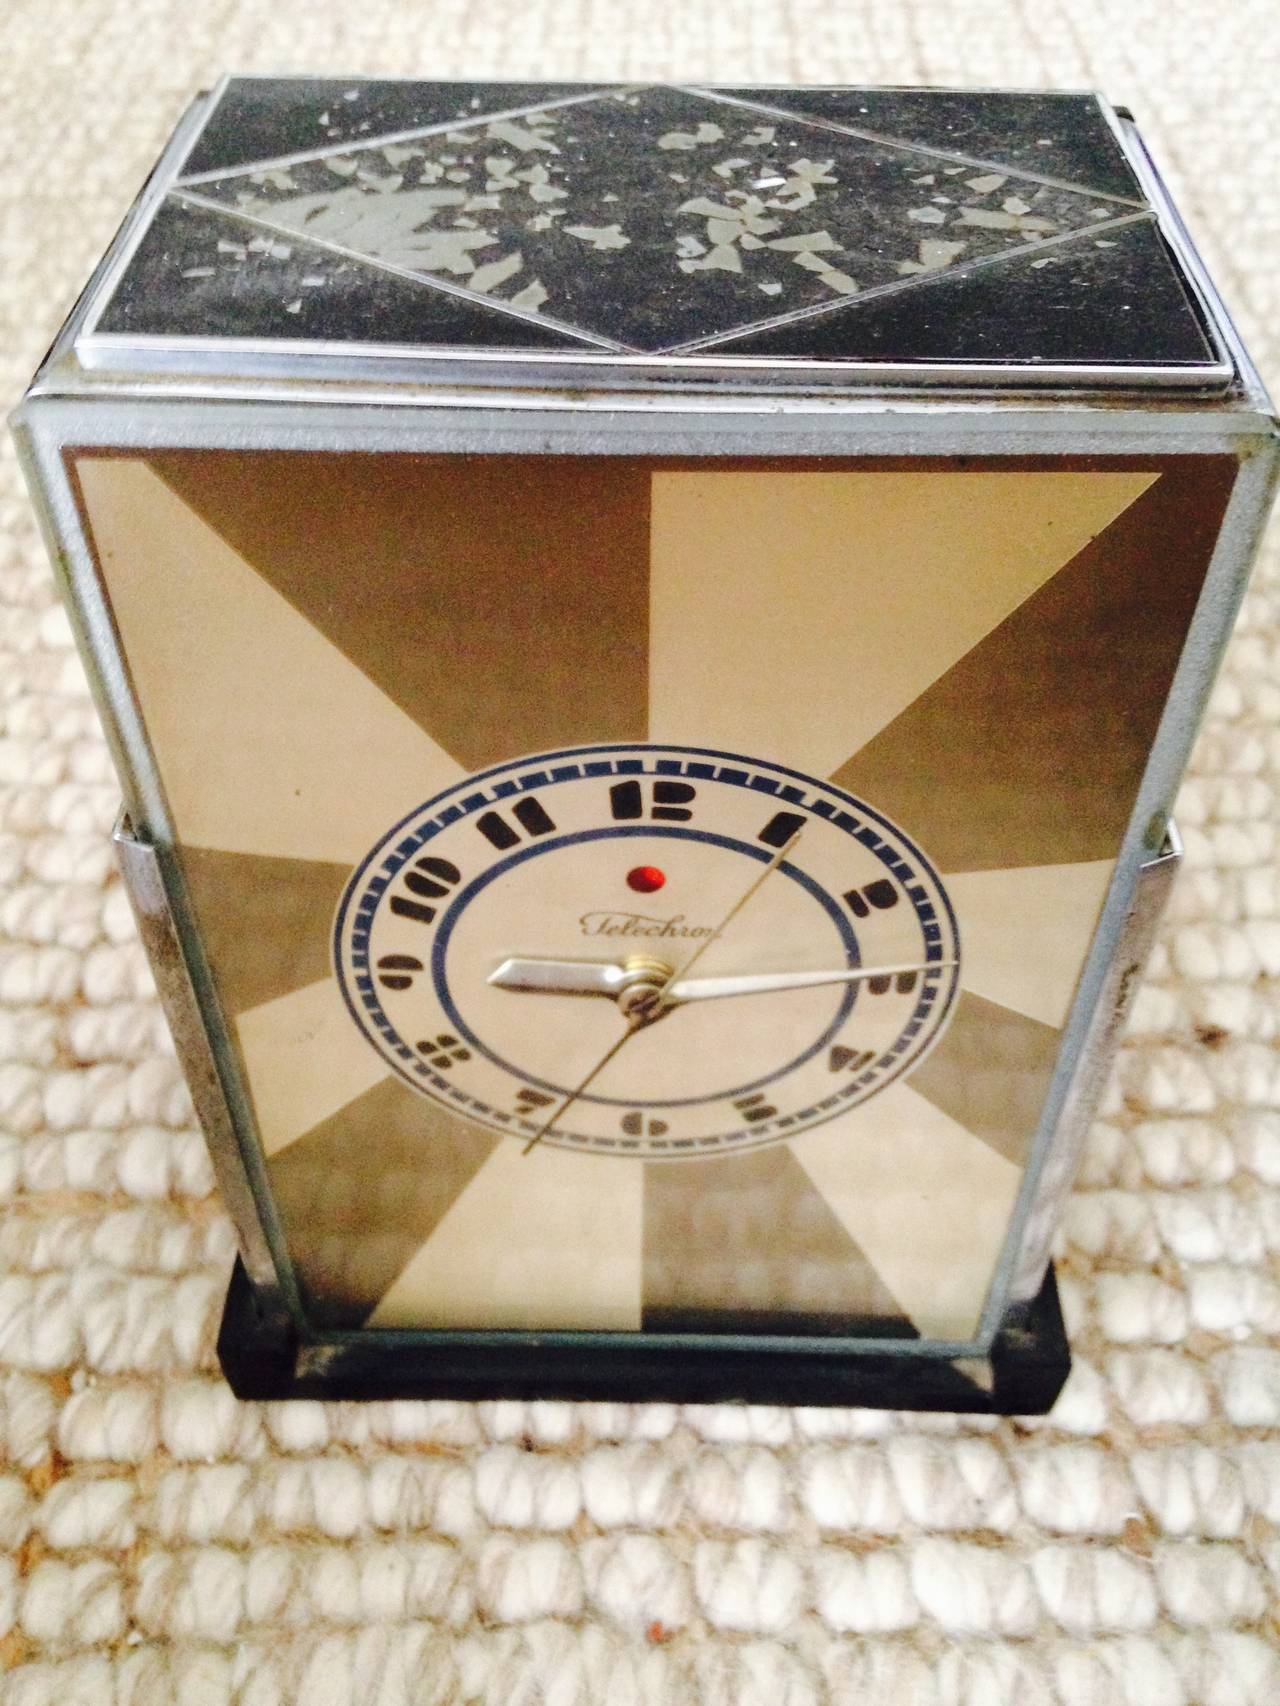 This is a great iconic clock designed by Paul Frankl for the Telechron Clock Company in the 1930s. Consisting of chromed and enameled brass with a great cubistic design and highly
stylized numbers on the clocks face. In original condition there is